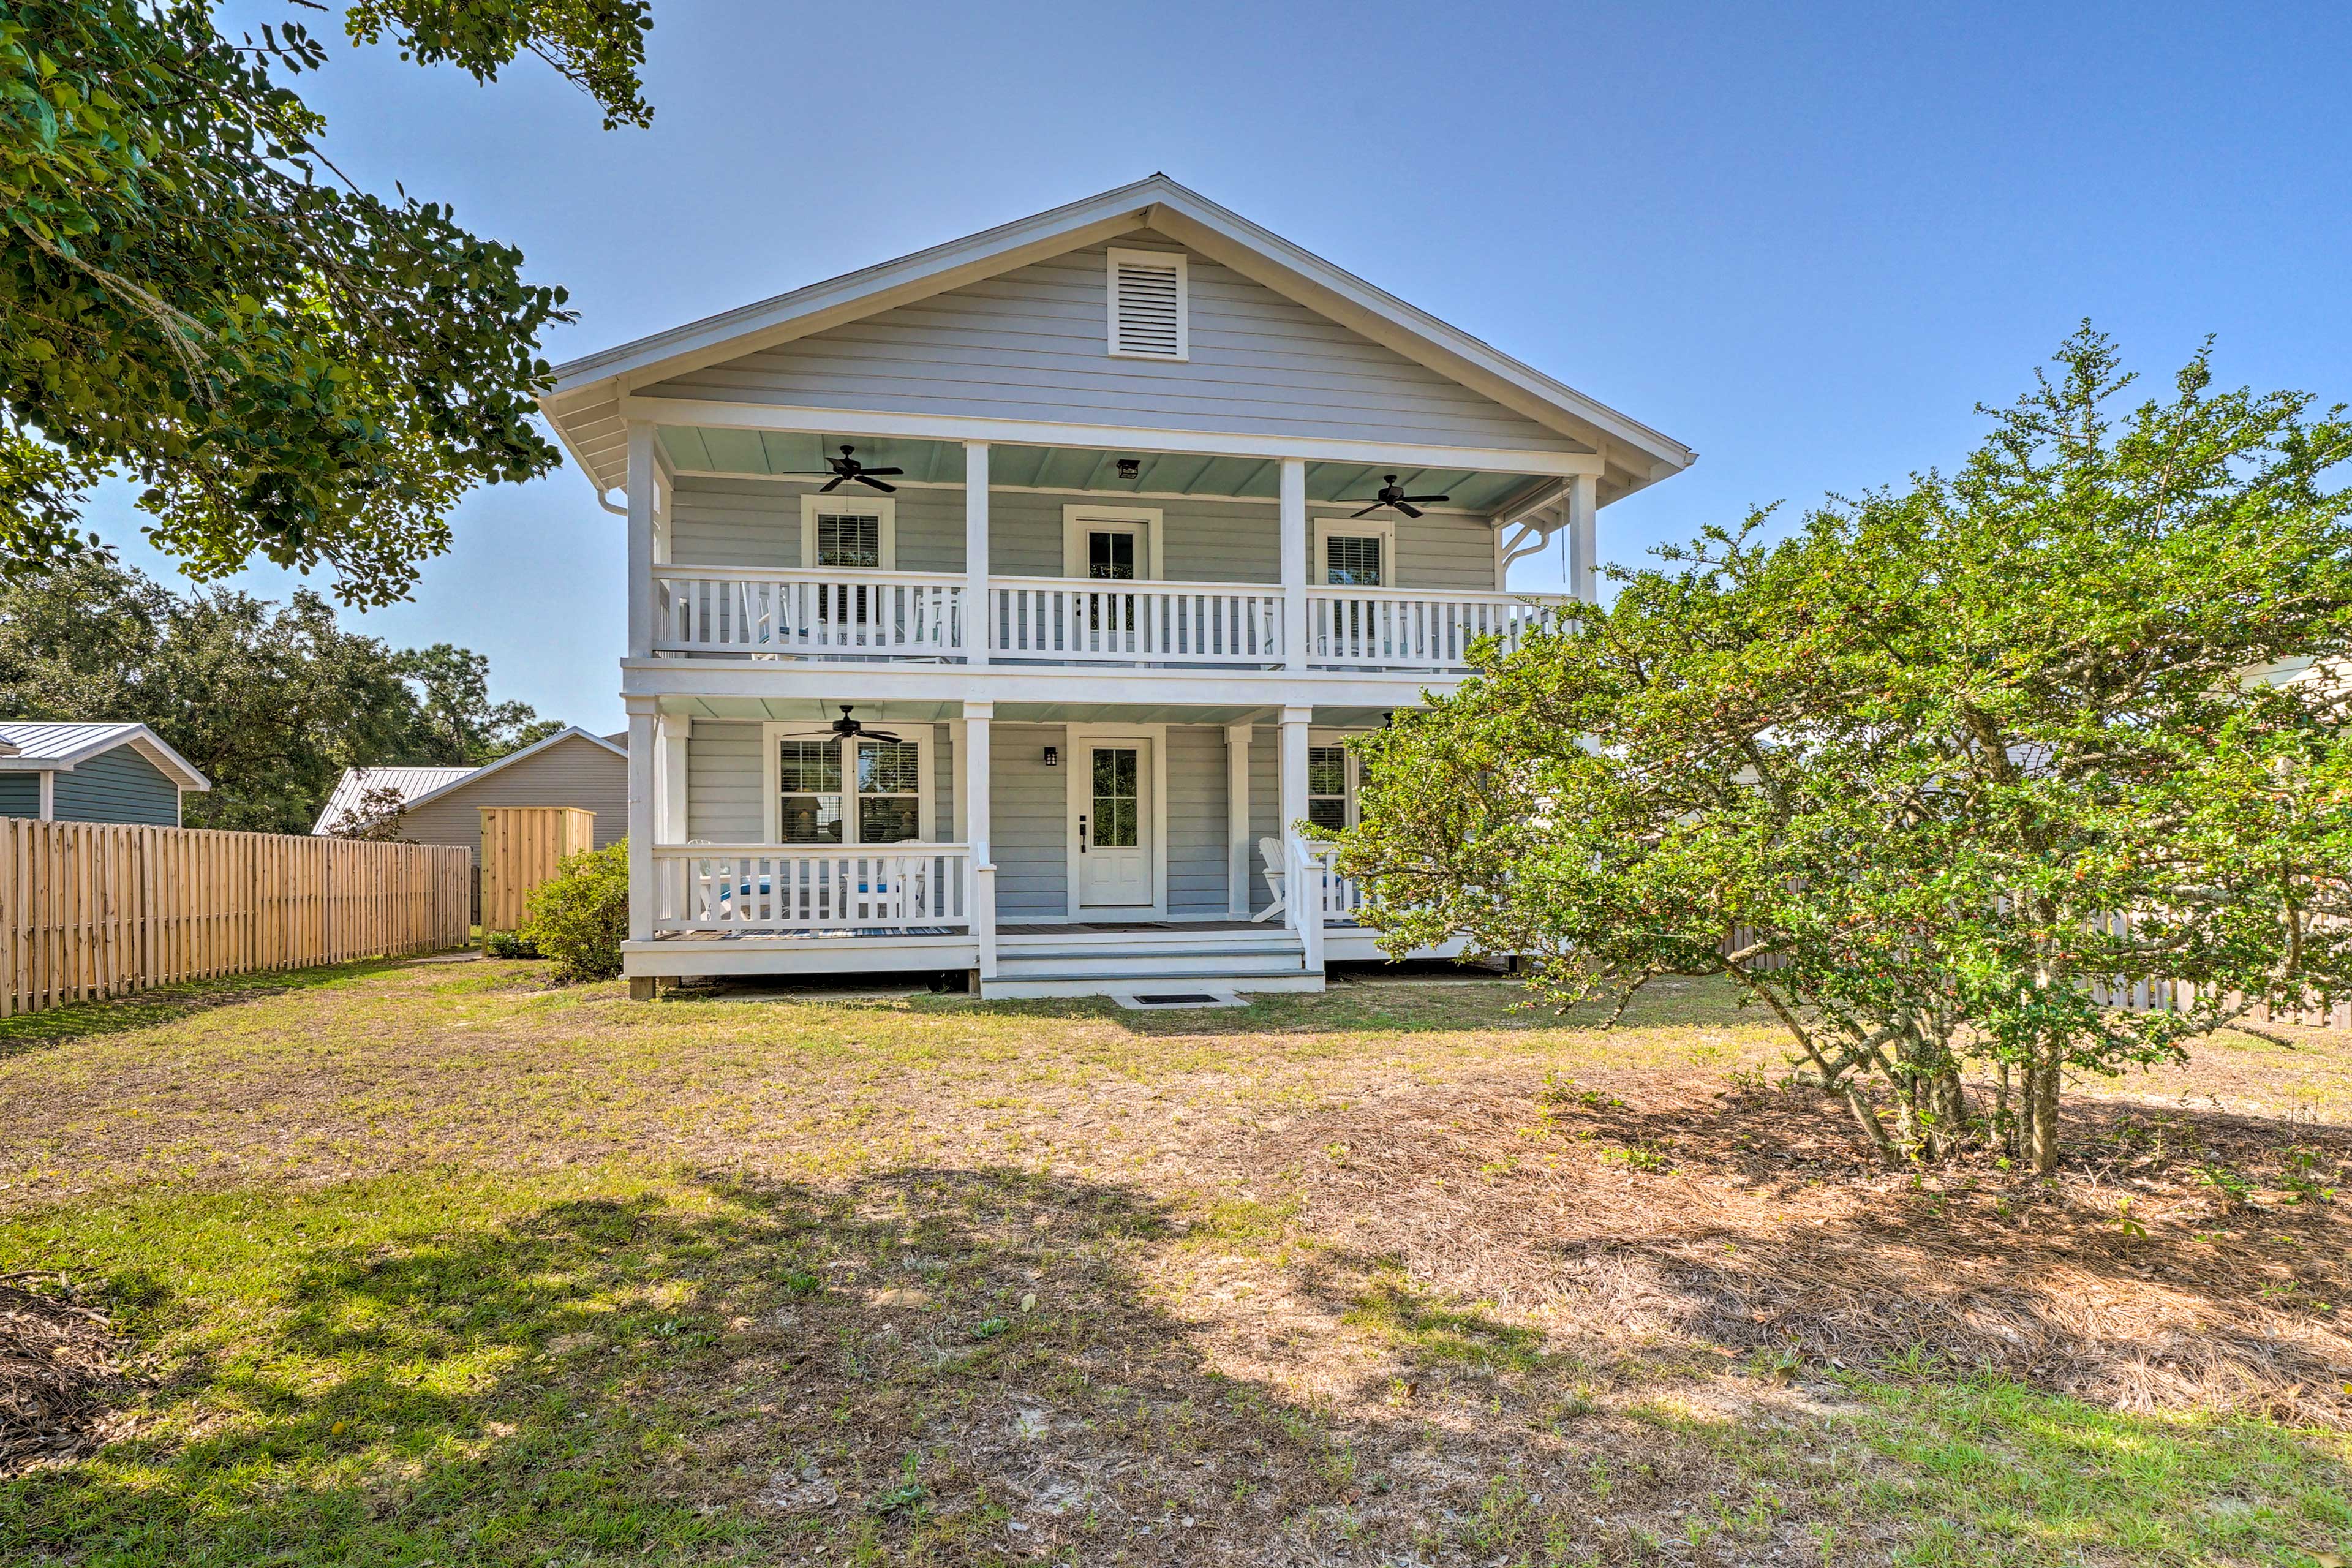 Oak Island Vacation Rental | 4BR | 3.5BA | 2,100 Sq Ft | Steps Required